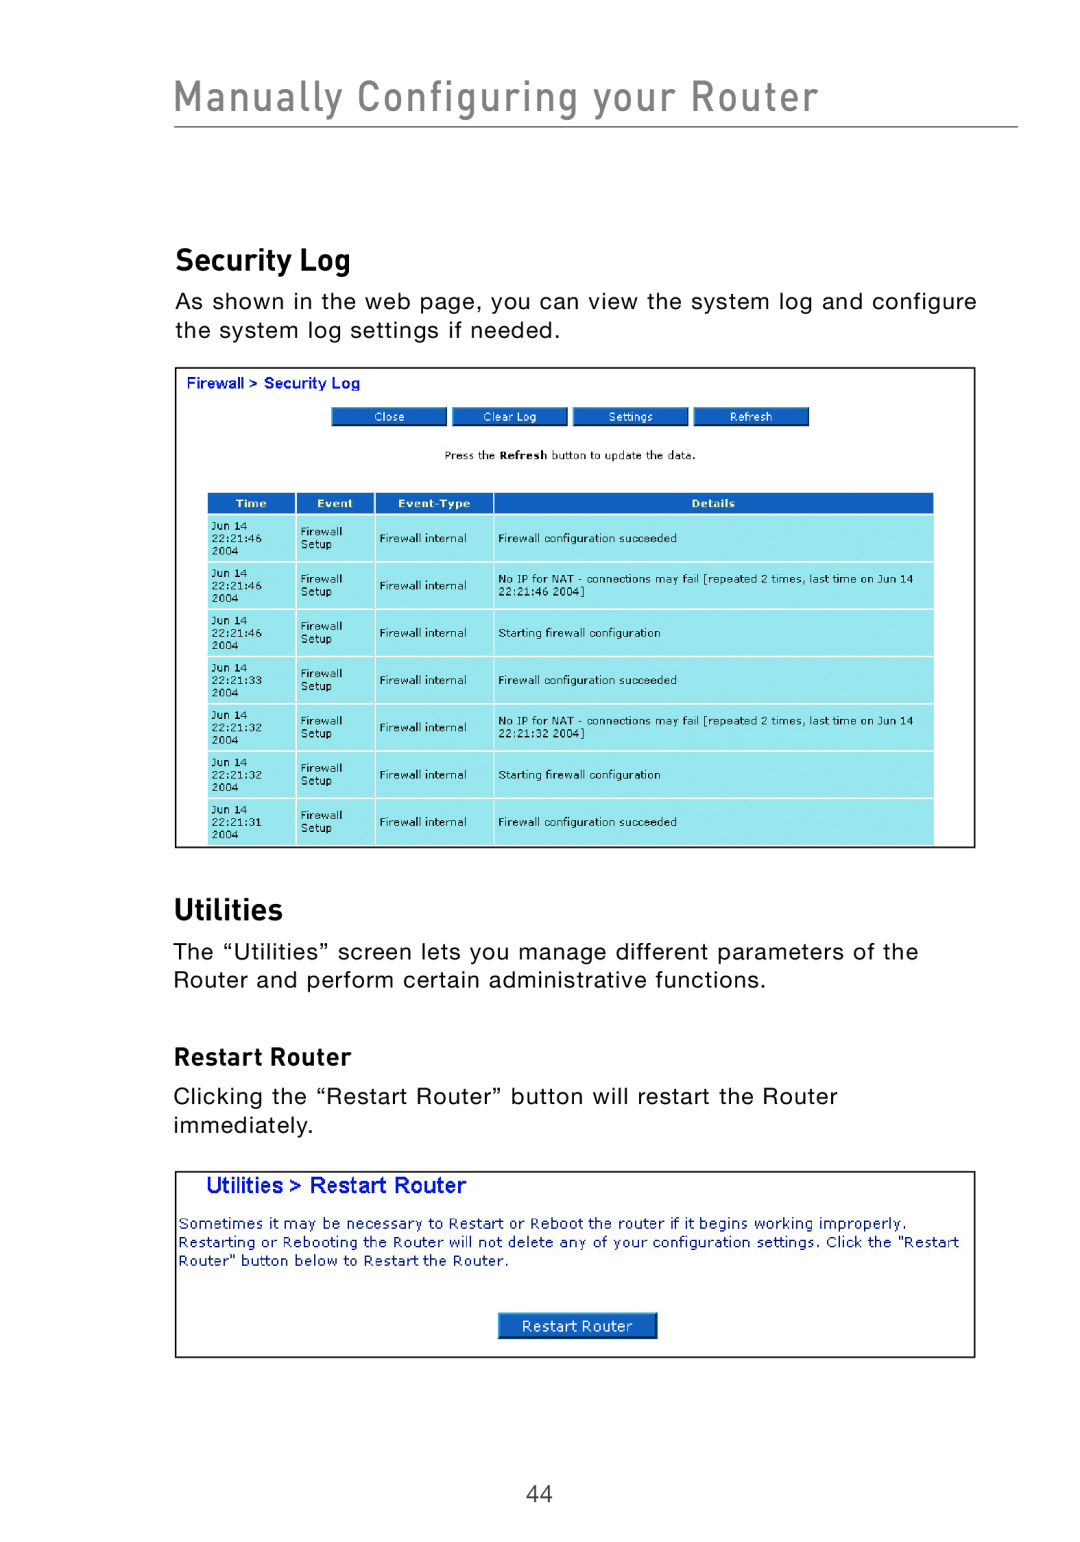 Belkin F5D7632UK4 user manual Security Log, Utilities, Restart Router, Manually Configuring your Router 